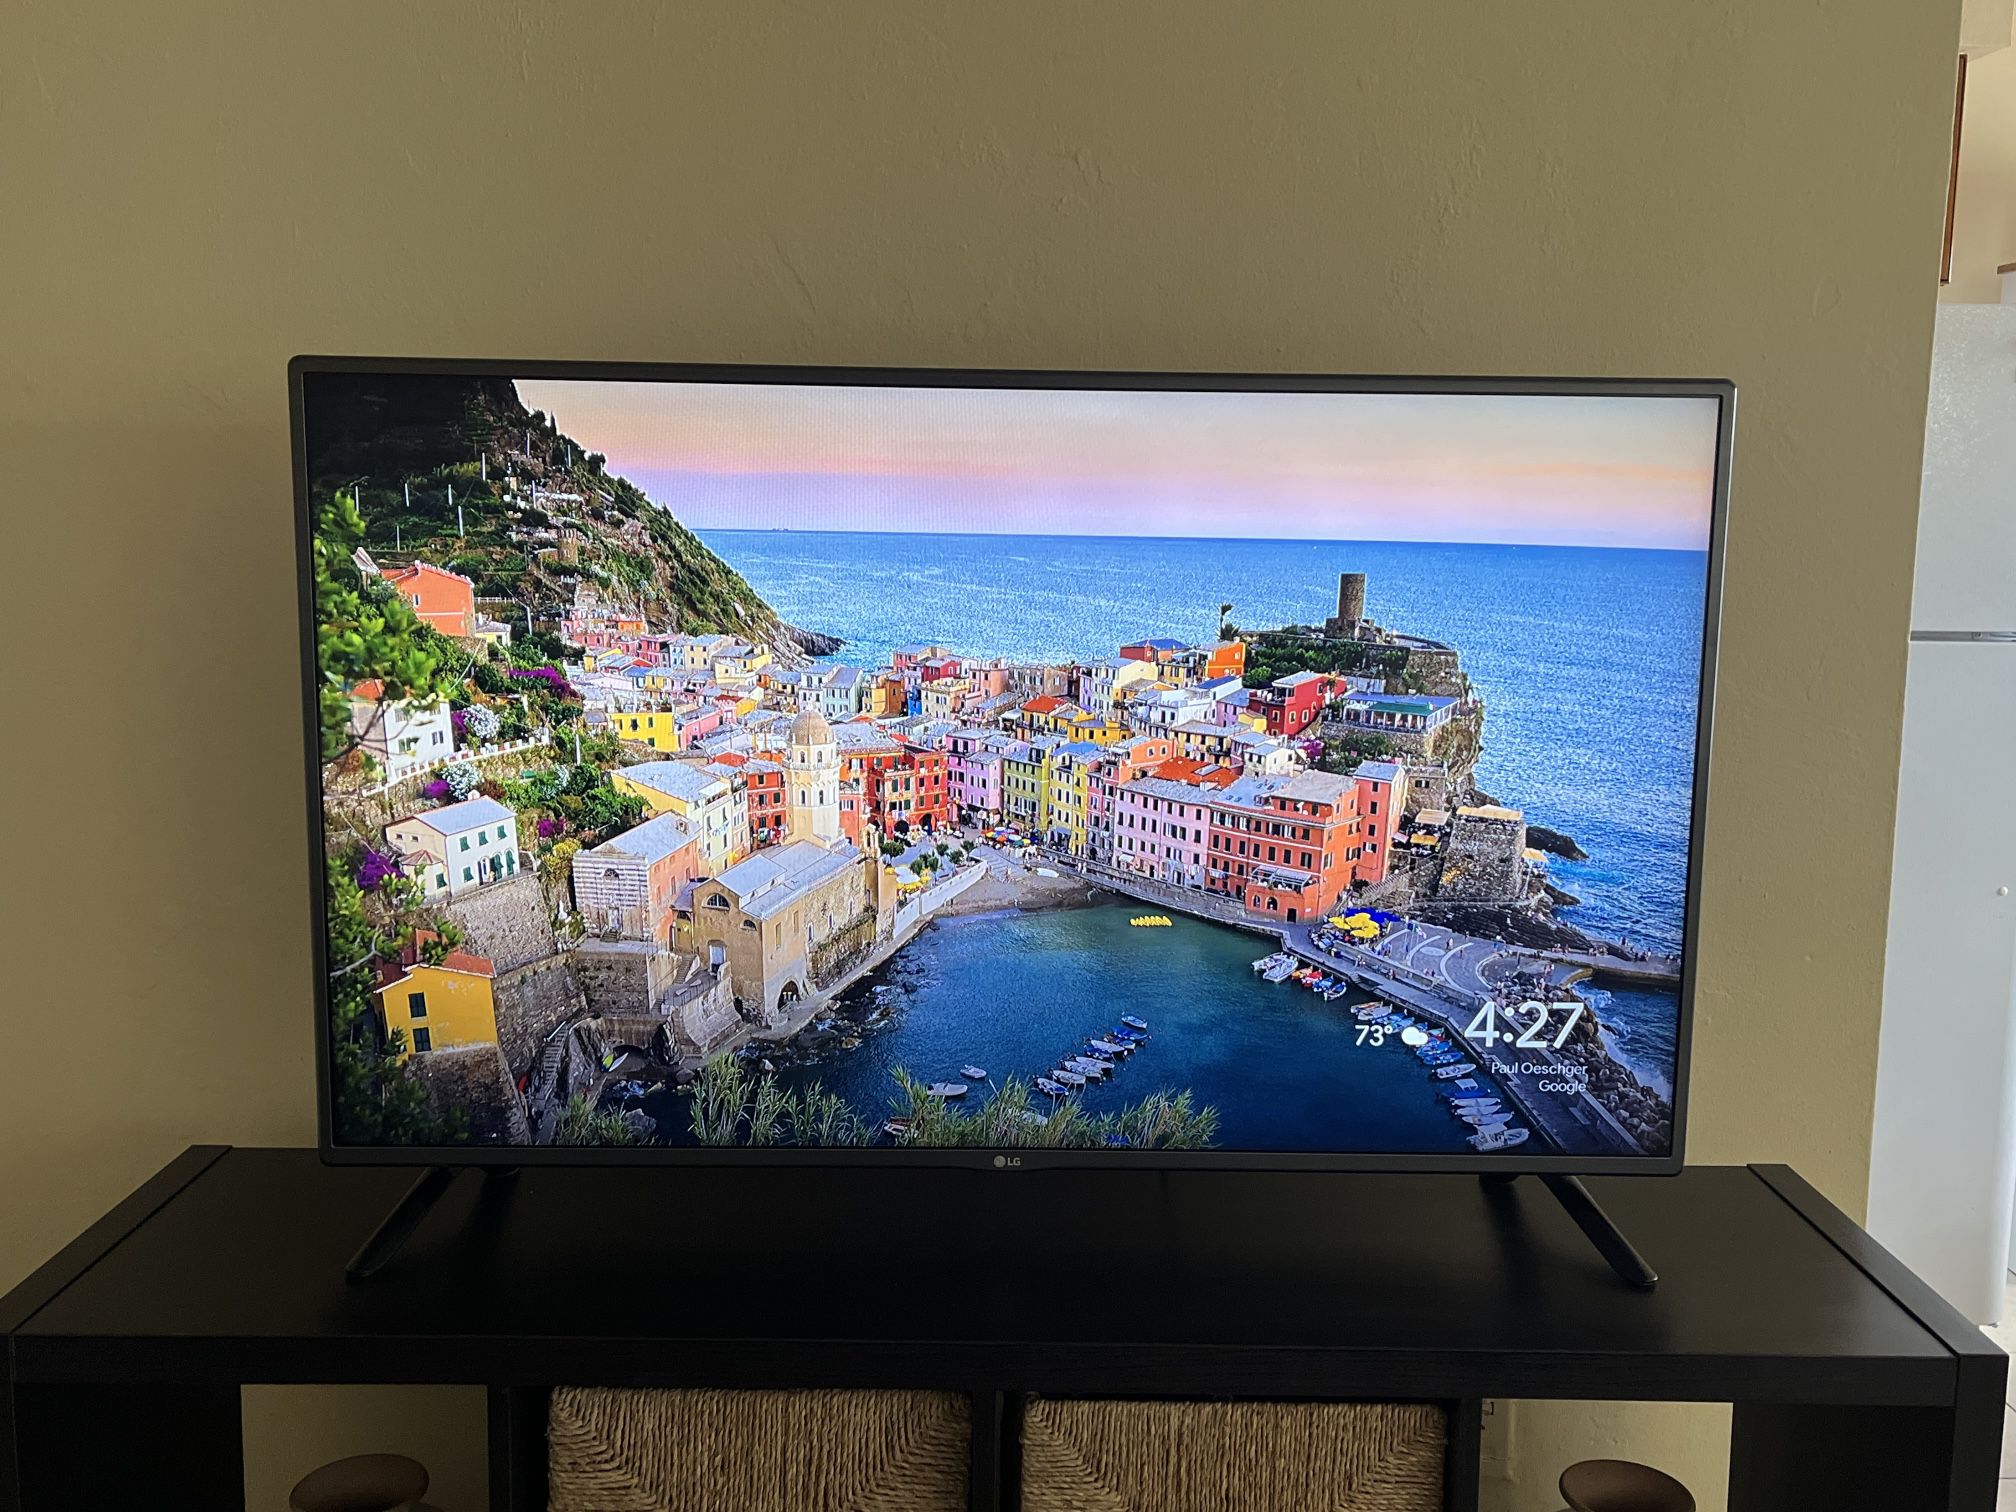 50” LG TV With Chromecast & HDMI Cable. Televisor LG 50” con Chromecast y Cable HDMI